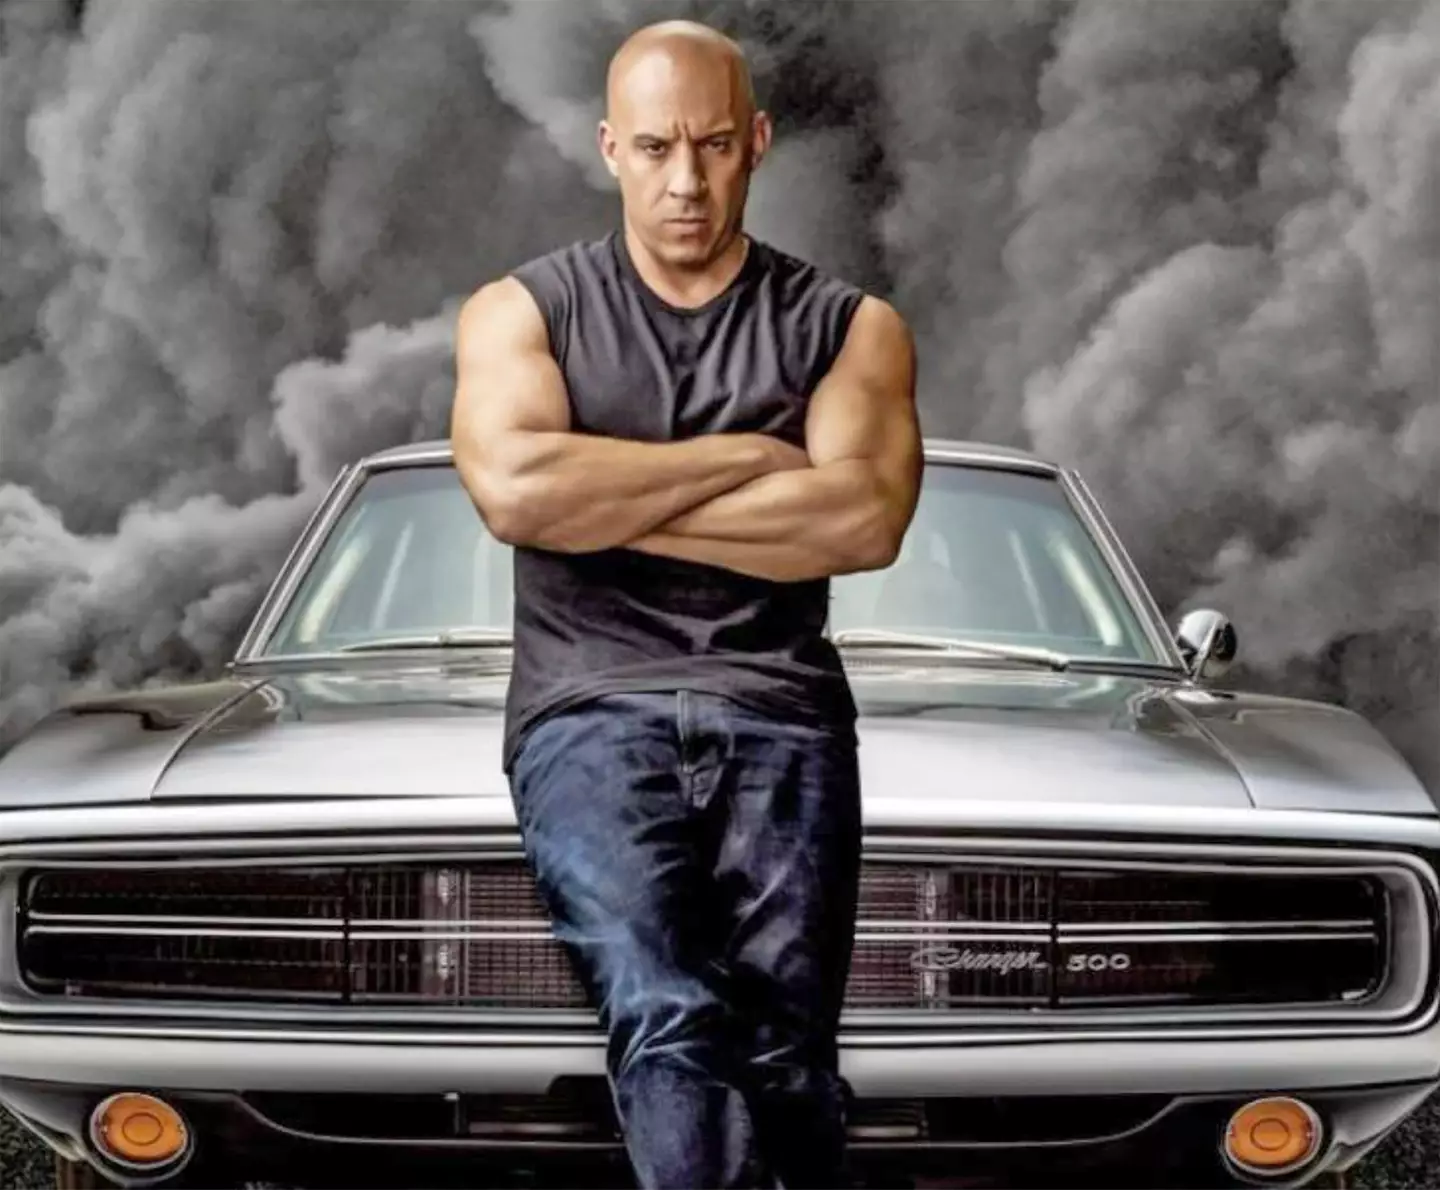 Vin Diesel is his idol and he's spent years trying to look like him.